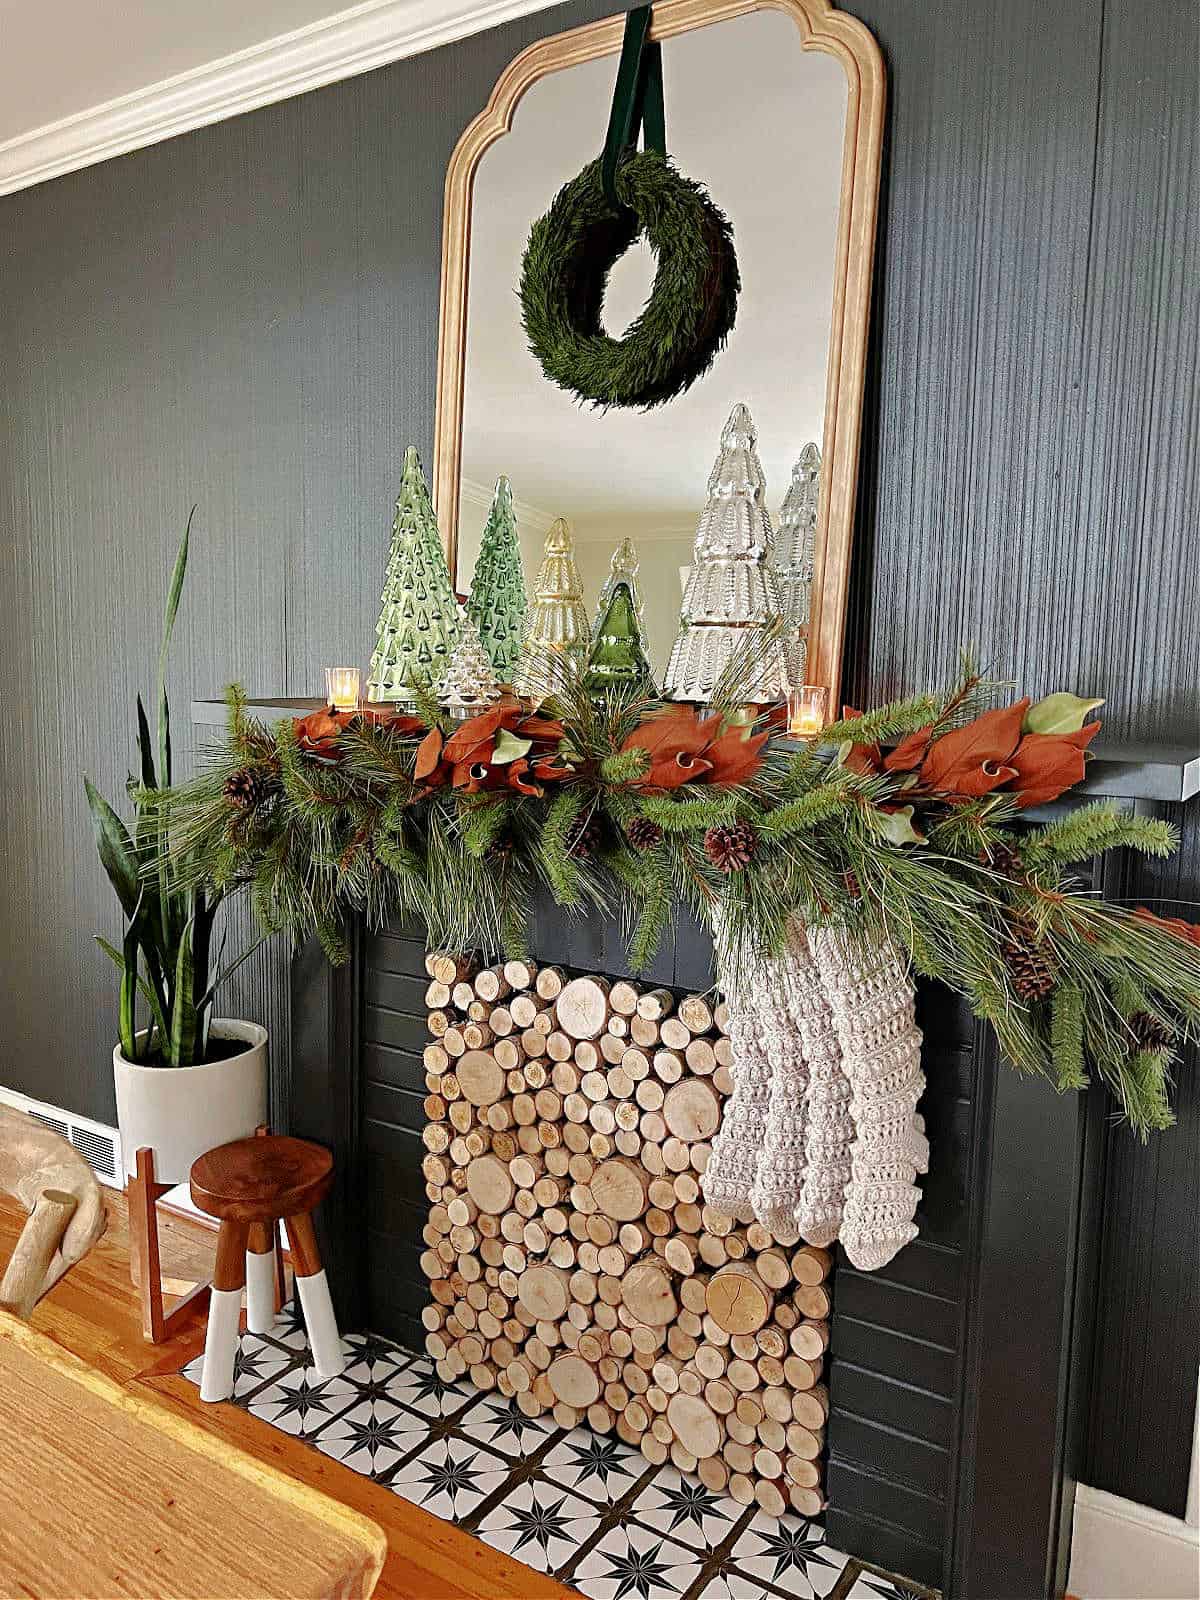 fireplace decorated for Christmas with garland, stockings and a wreath